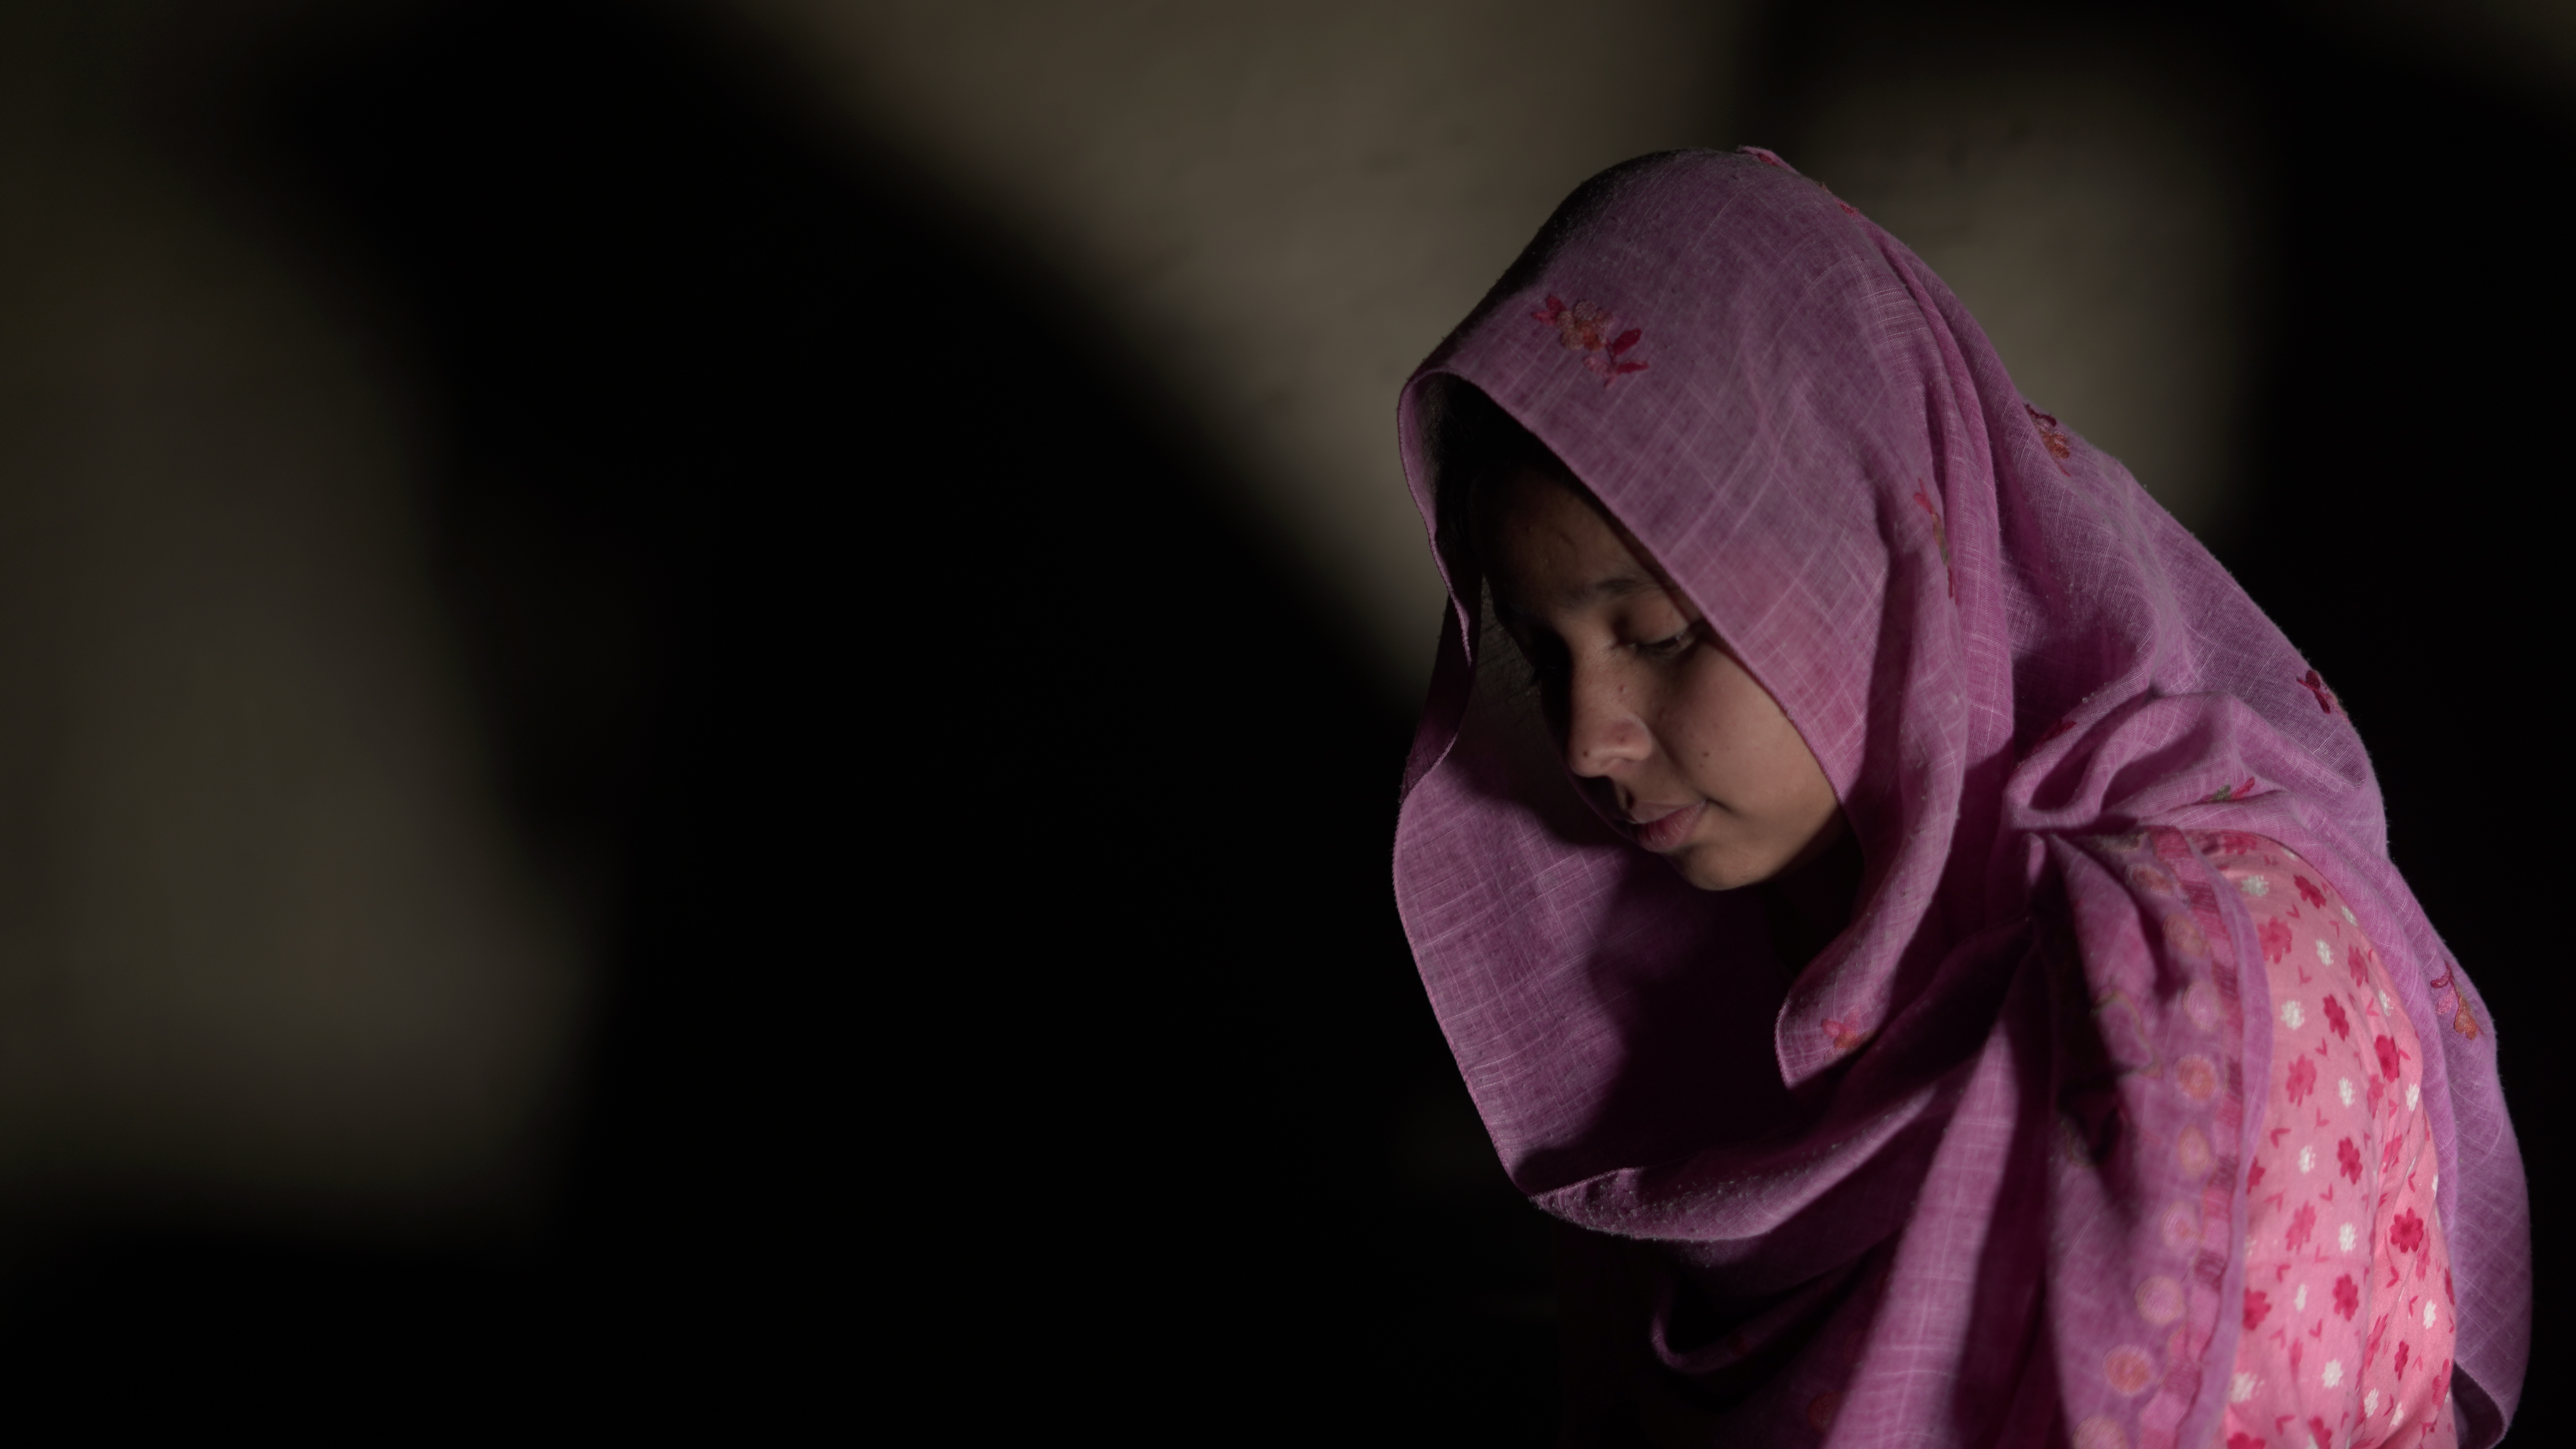 Bangladeshi girl wearing a bright pink headscarf pictured in profile, looking downwards in a dingy room